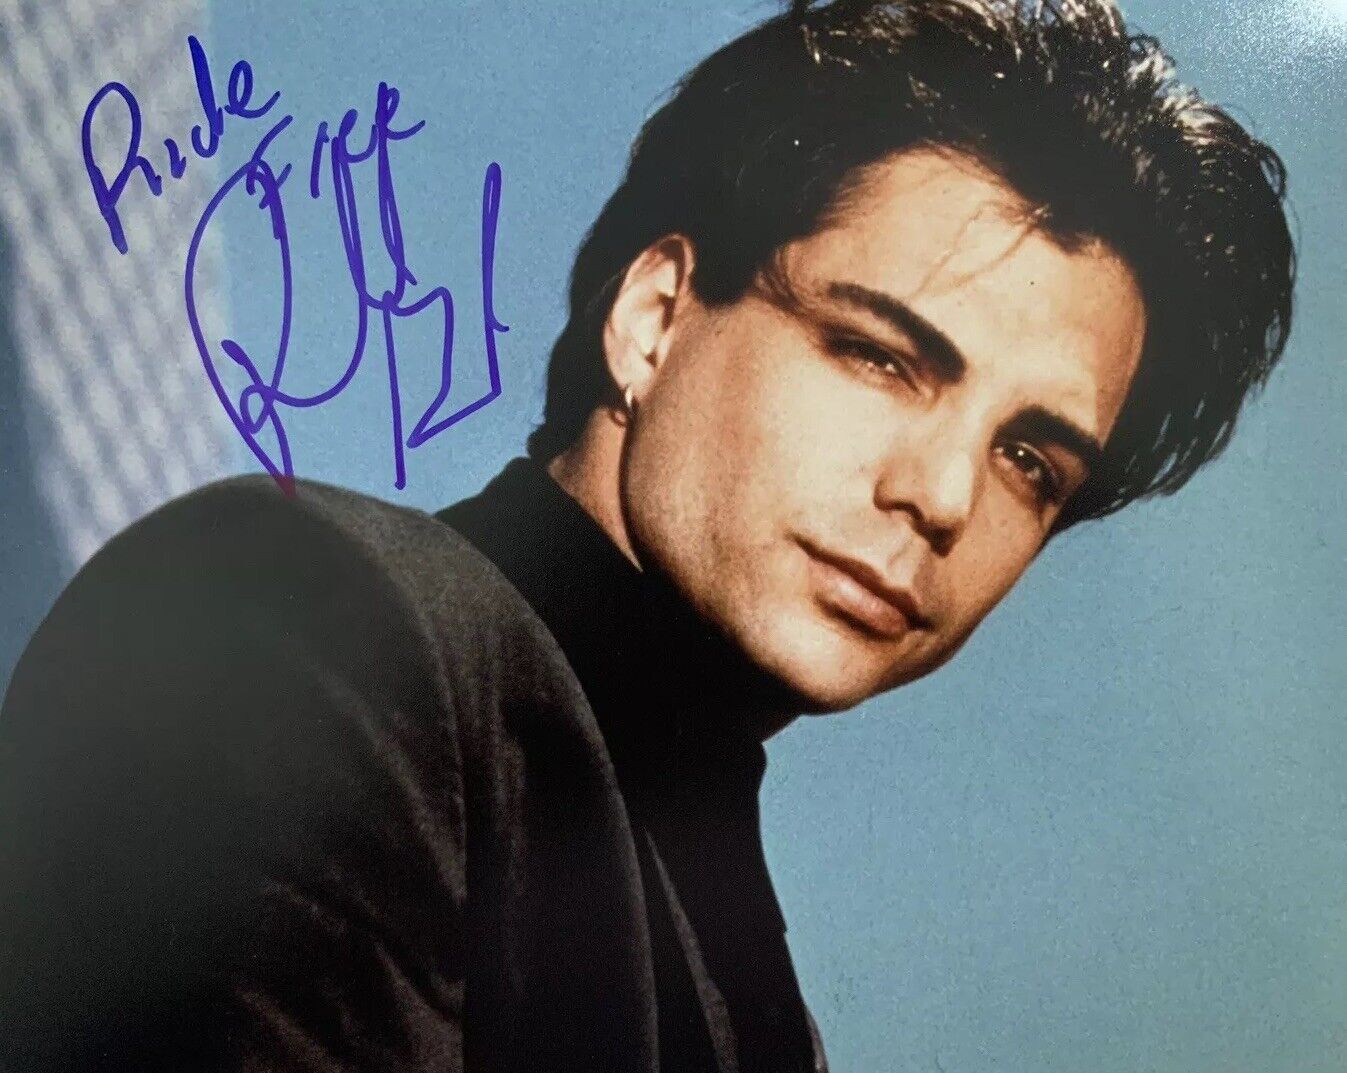 RICHARD GRIECO HAND SIGNED 8x10 Photo Poster painting BOOKER AUTOGRAPHED AUTHENTIC RARE